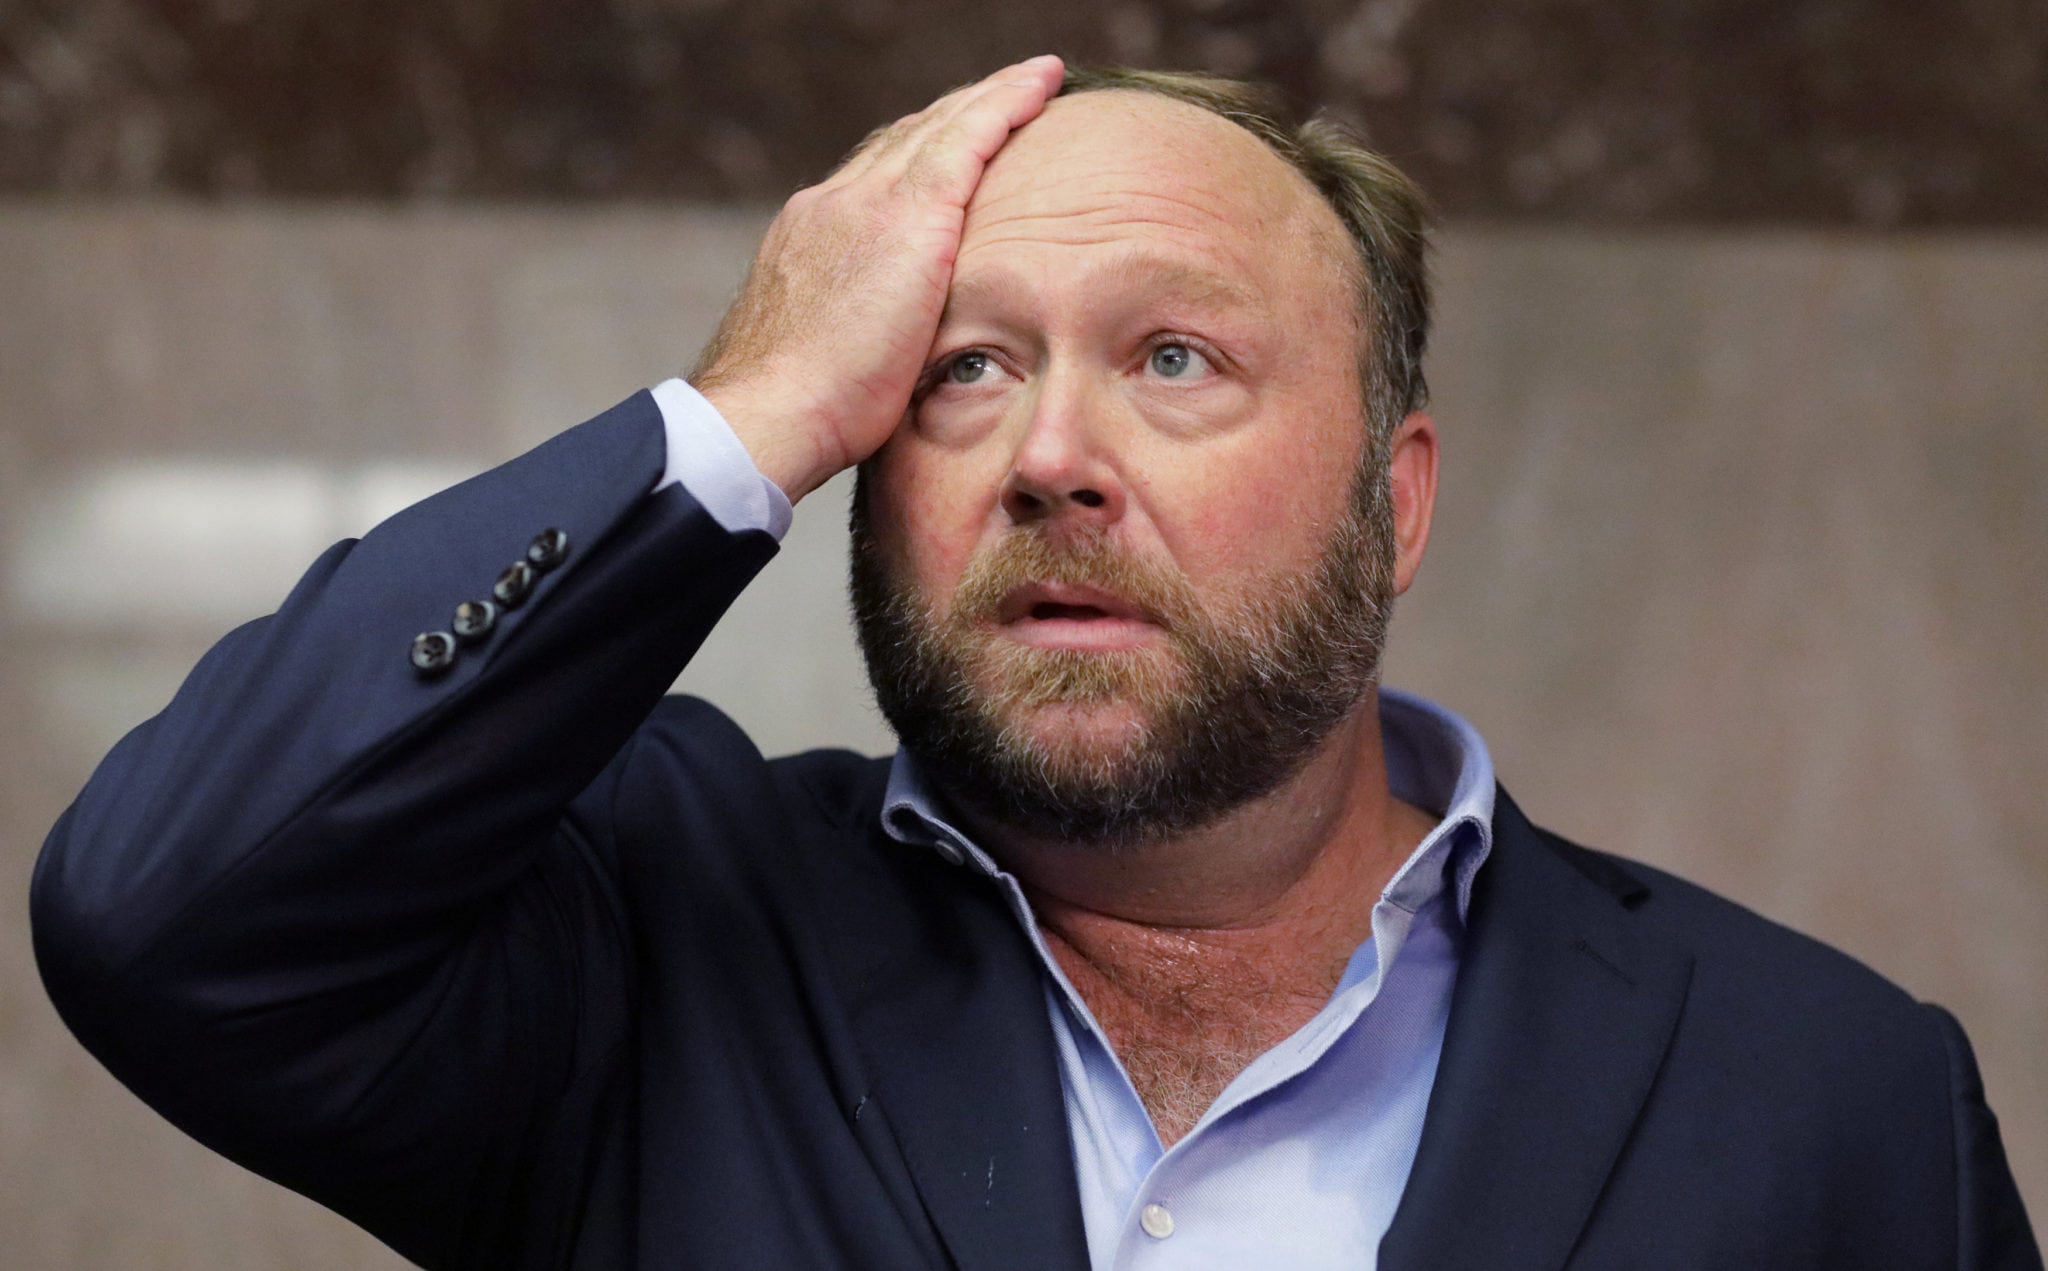 The 1/6 Committee Just Got A Windfall Of Evidence As Alex Jones's Phone To Be Turned Over